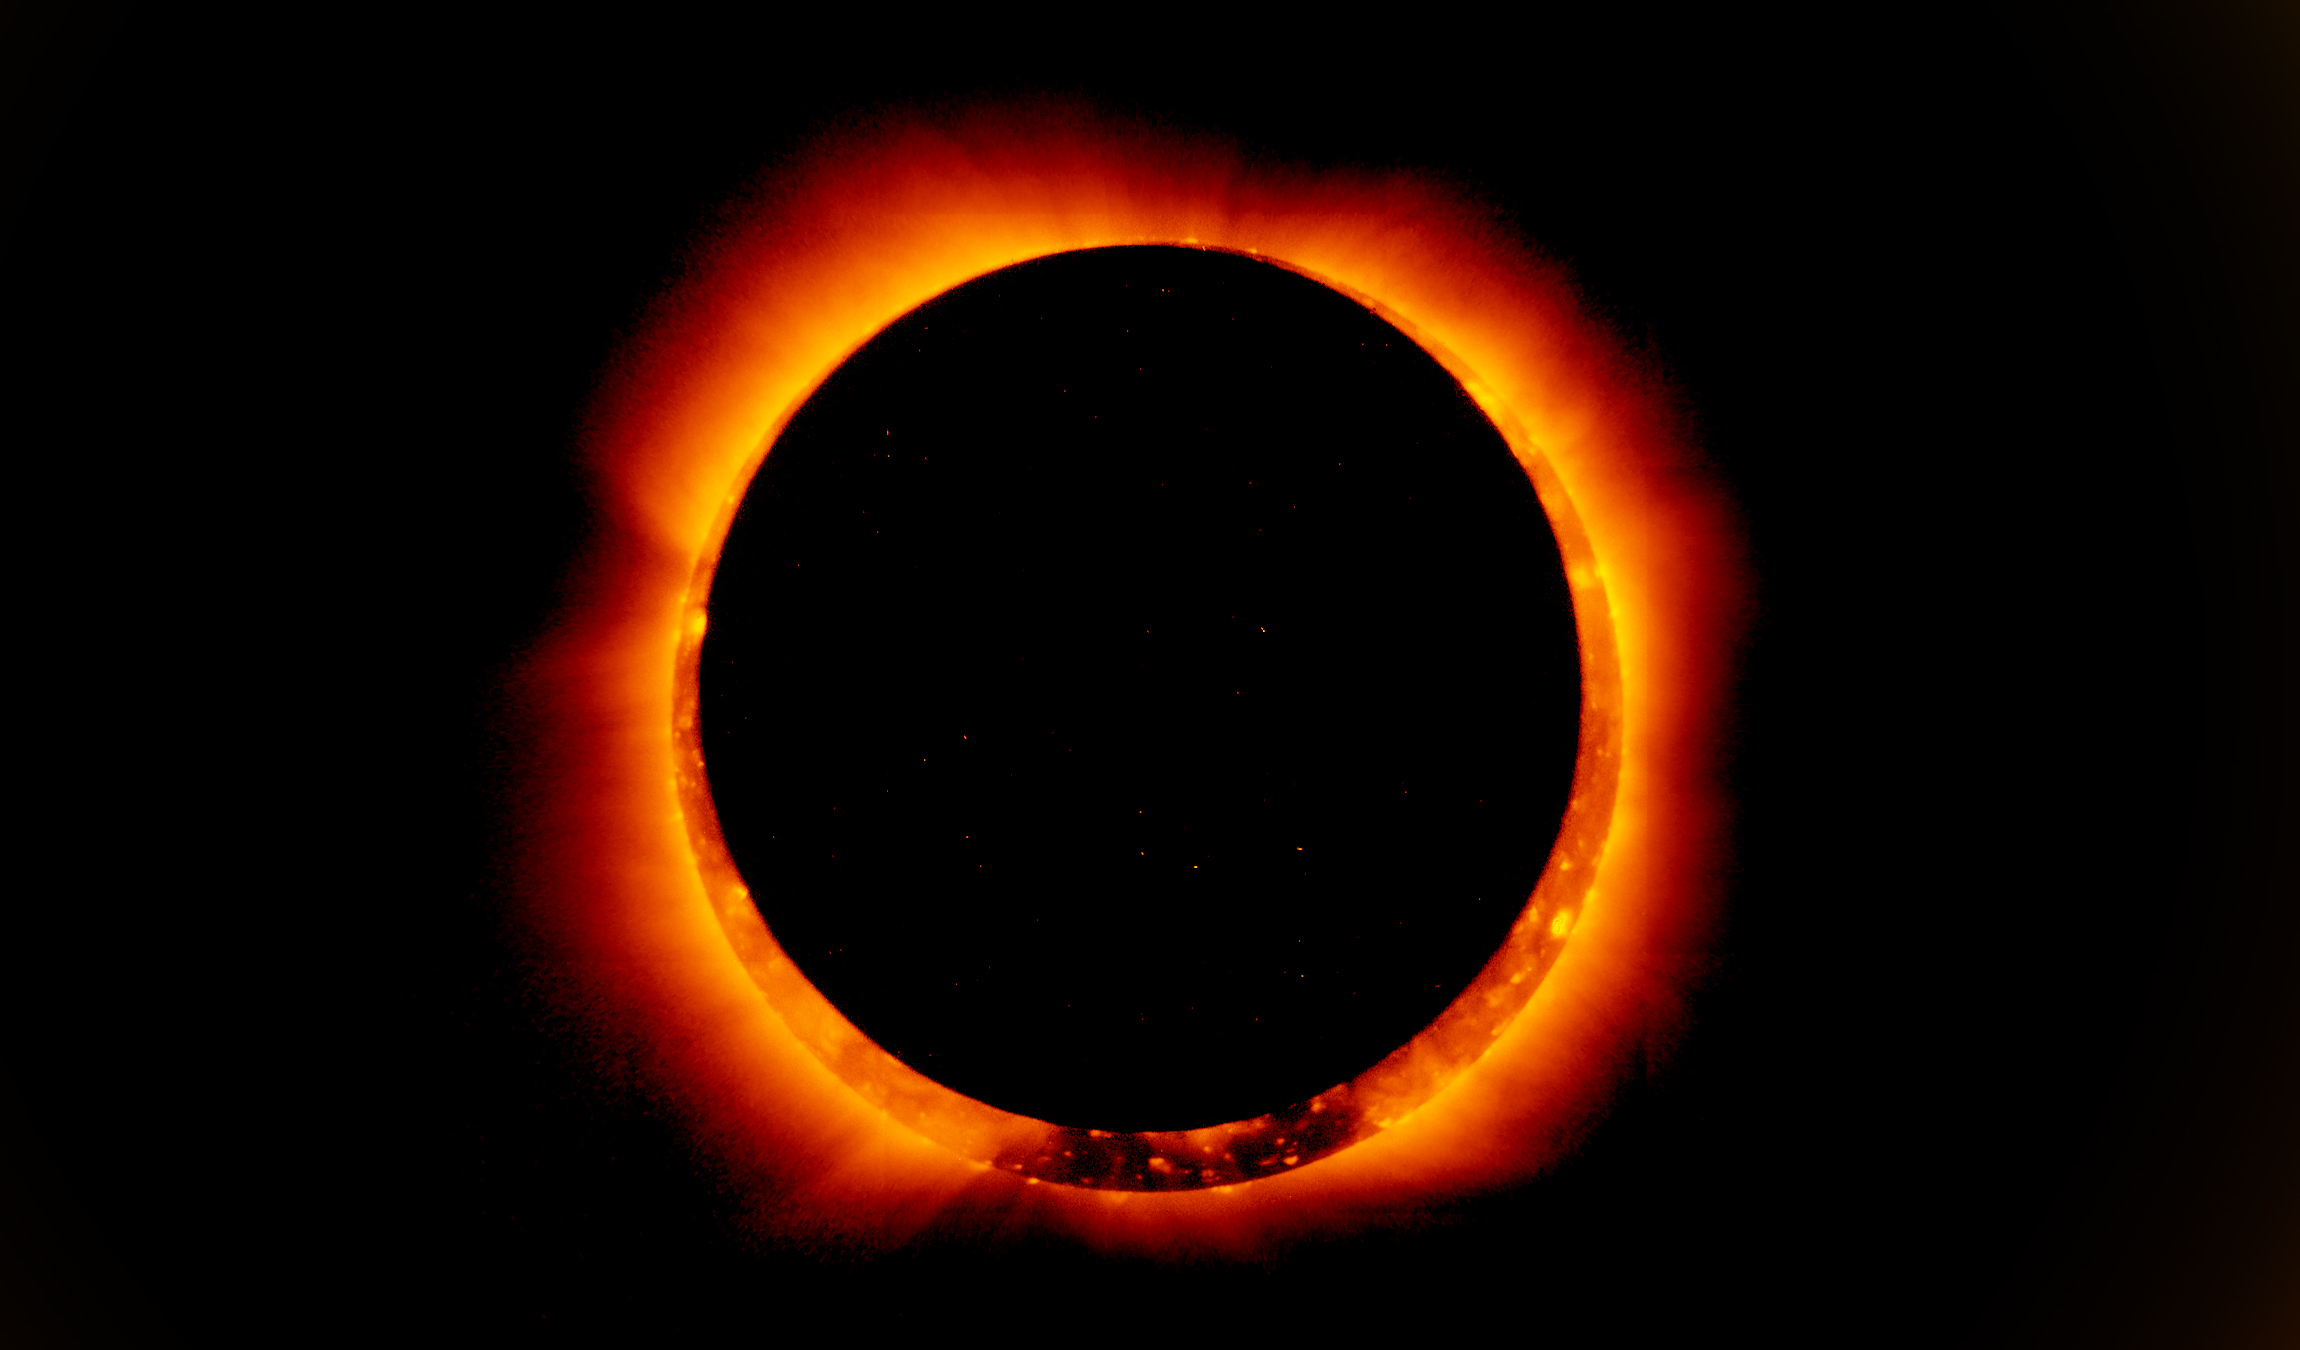 an-annular-solar-eclipse-is-happening-on-the-summer-solstice-but-no-it-s-not-the-end-of-days